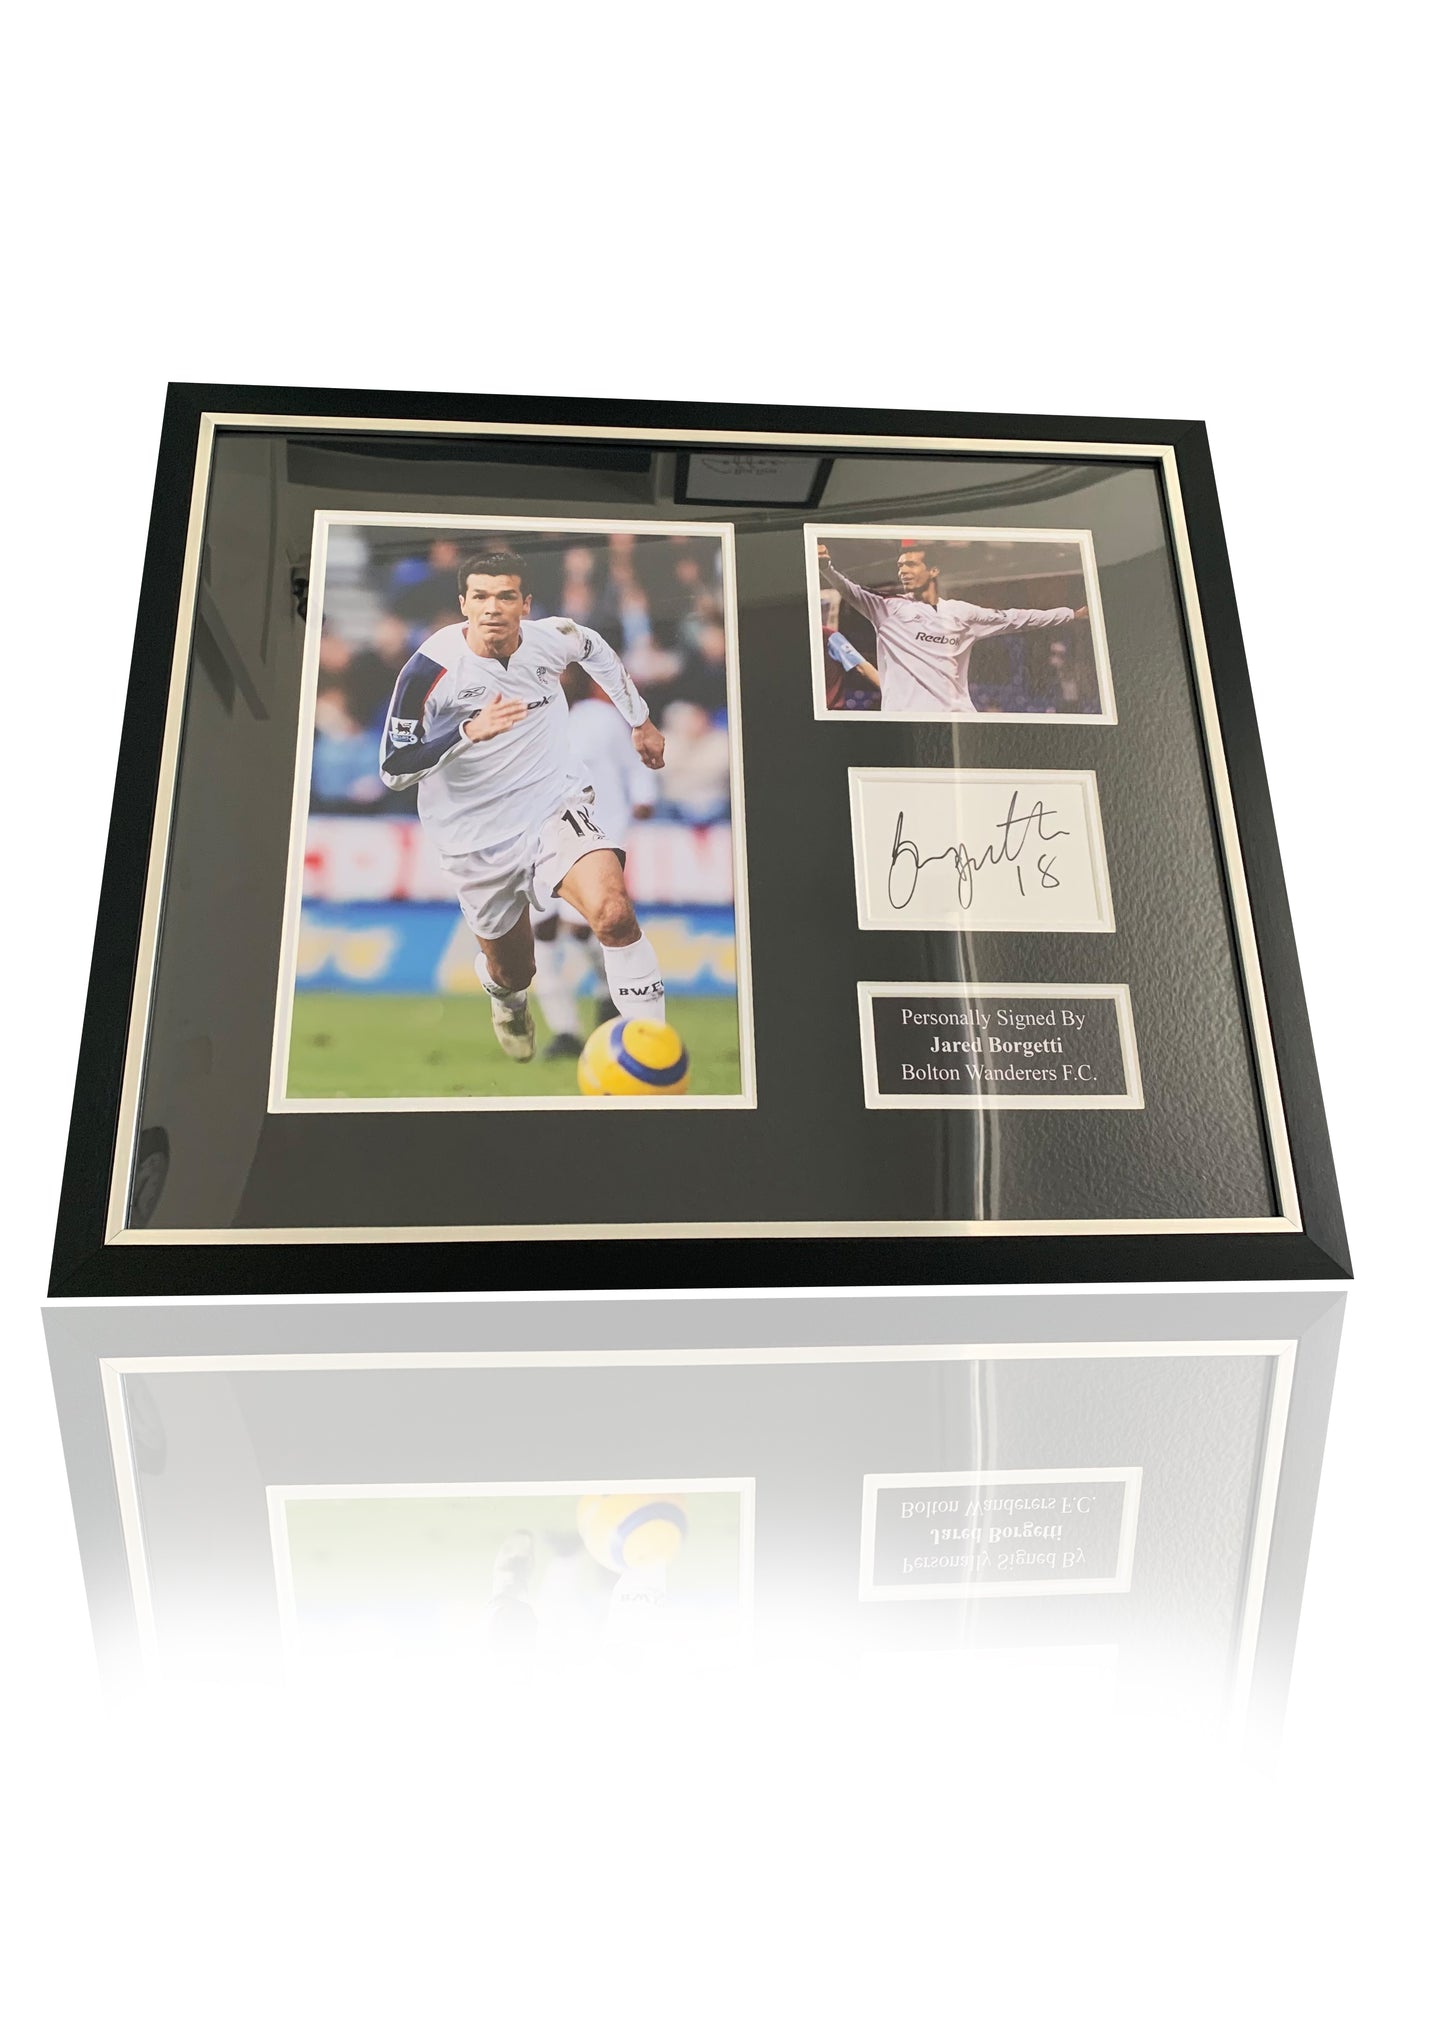 Jared Borgetti Bolton Wanderers signed framed photo card montage